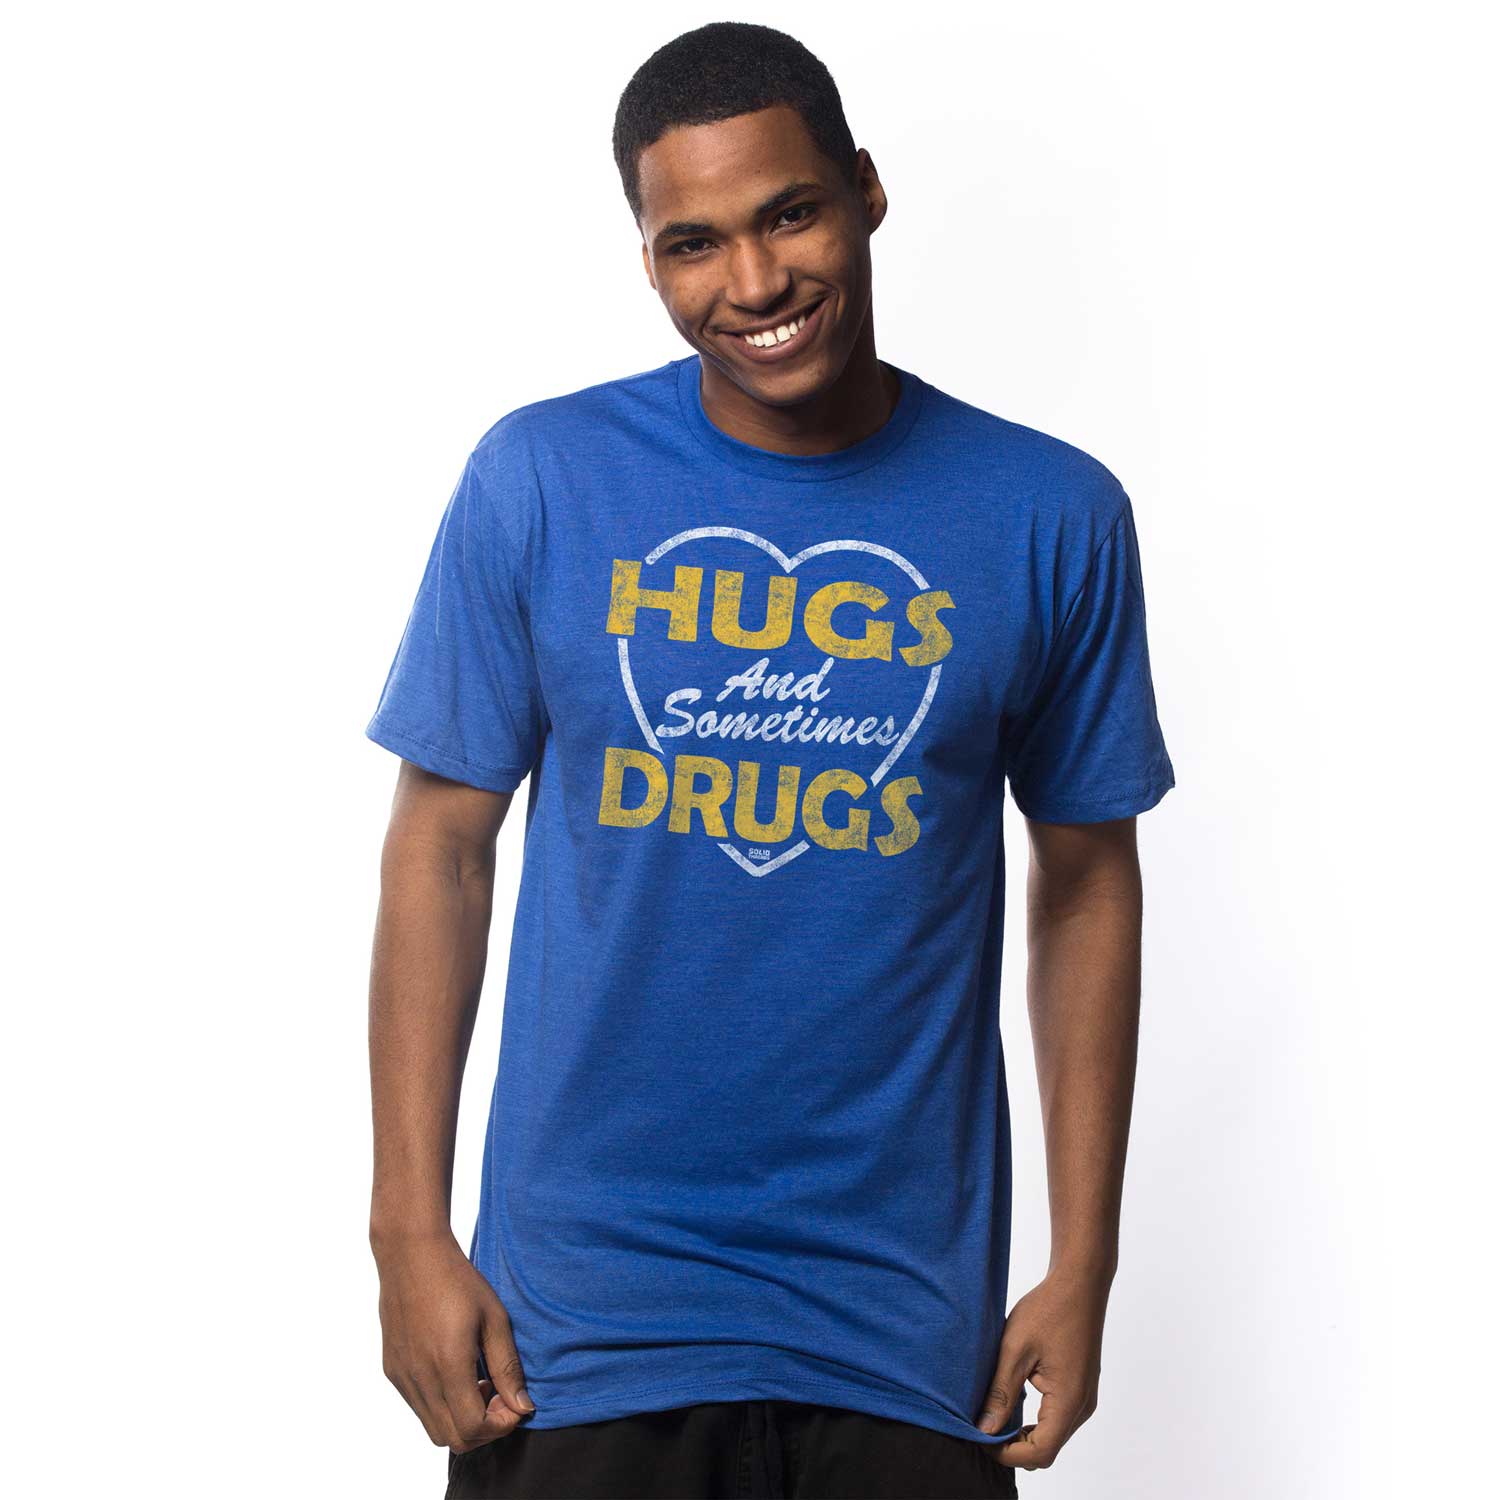 Men's Hugs and Sometimes Drugs Funny Graphic Tee | Cool Festival Shirt on Model | Solid Threads